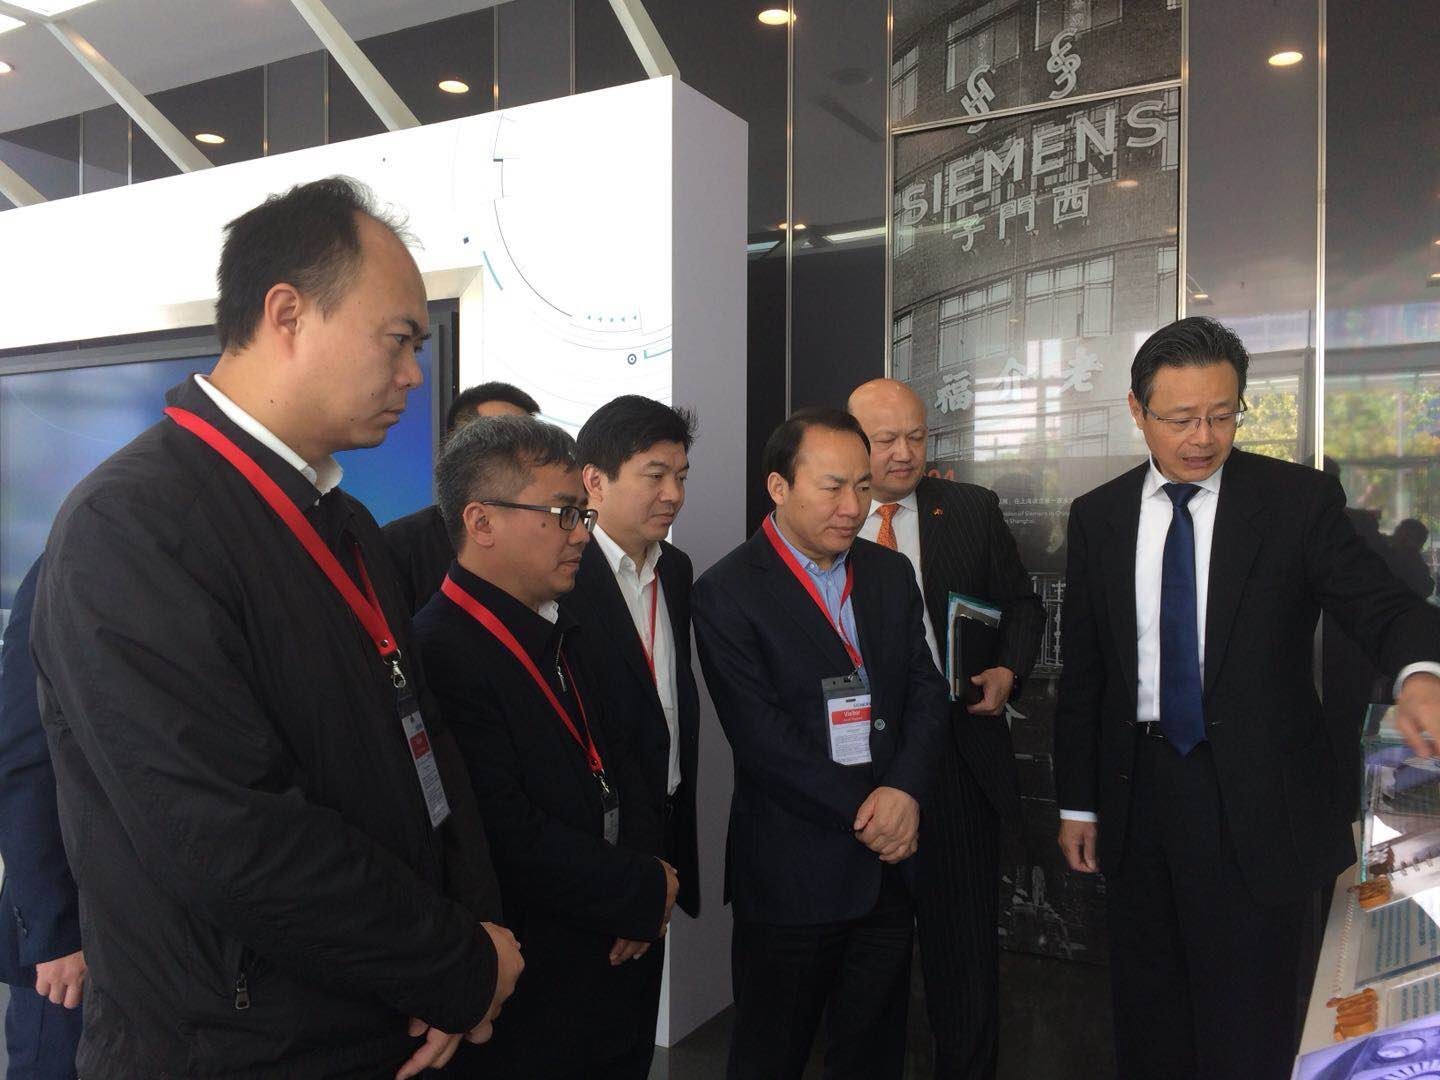 Cheng Shuiquan leads artificial intelligence and robot industry chain to visit Shanghai Siemens